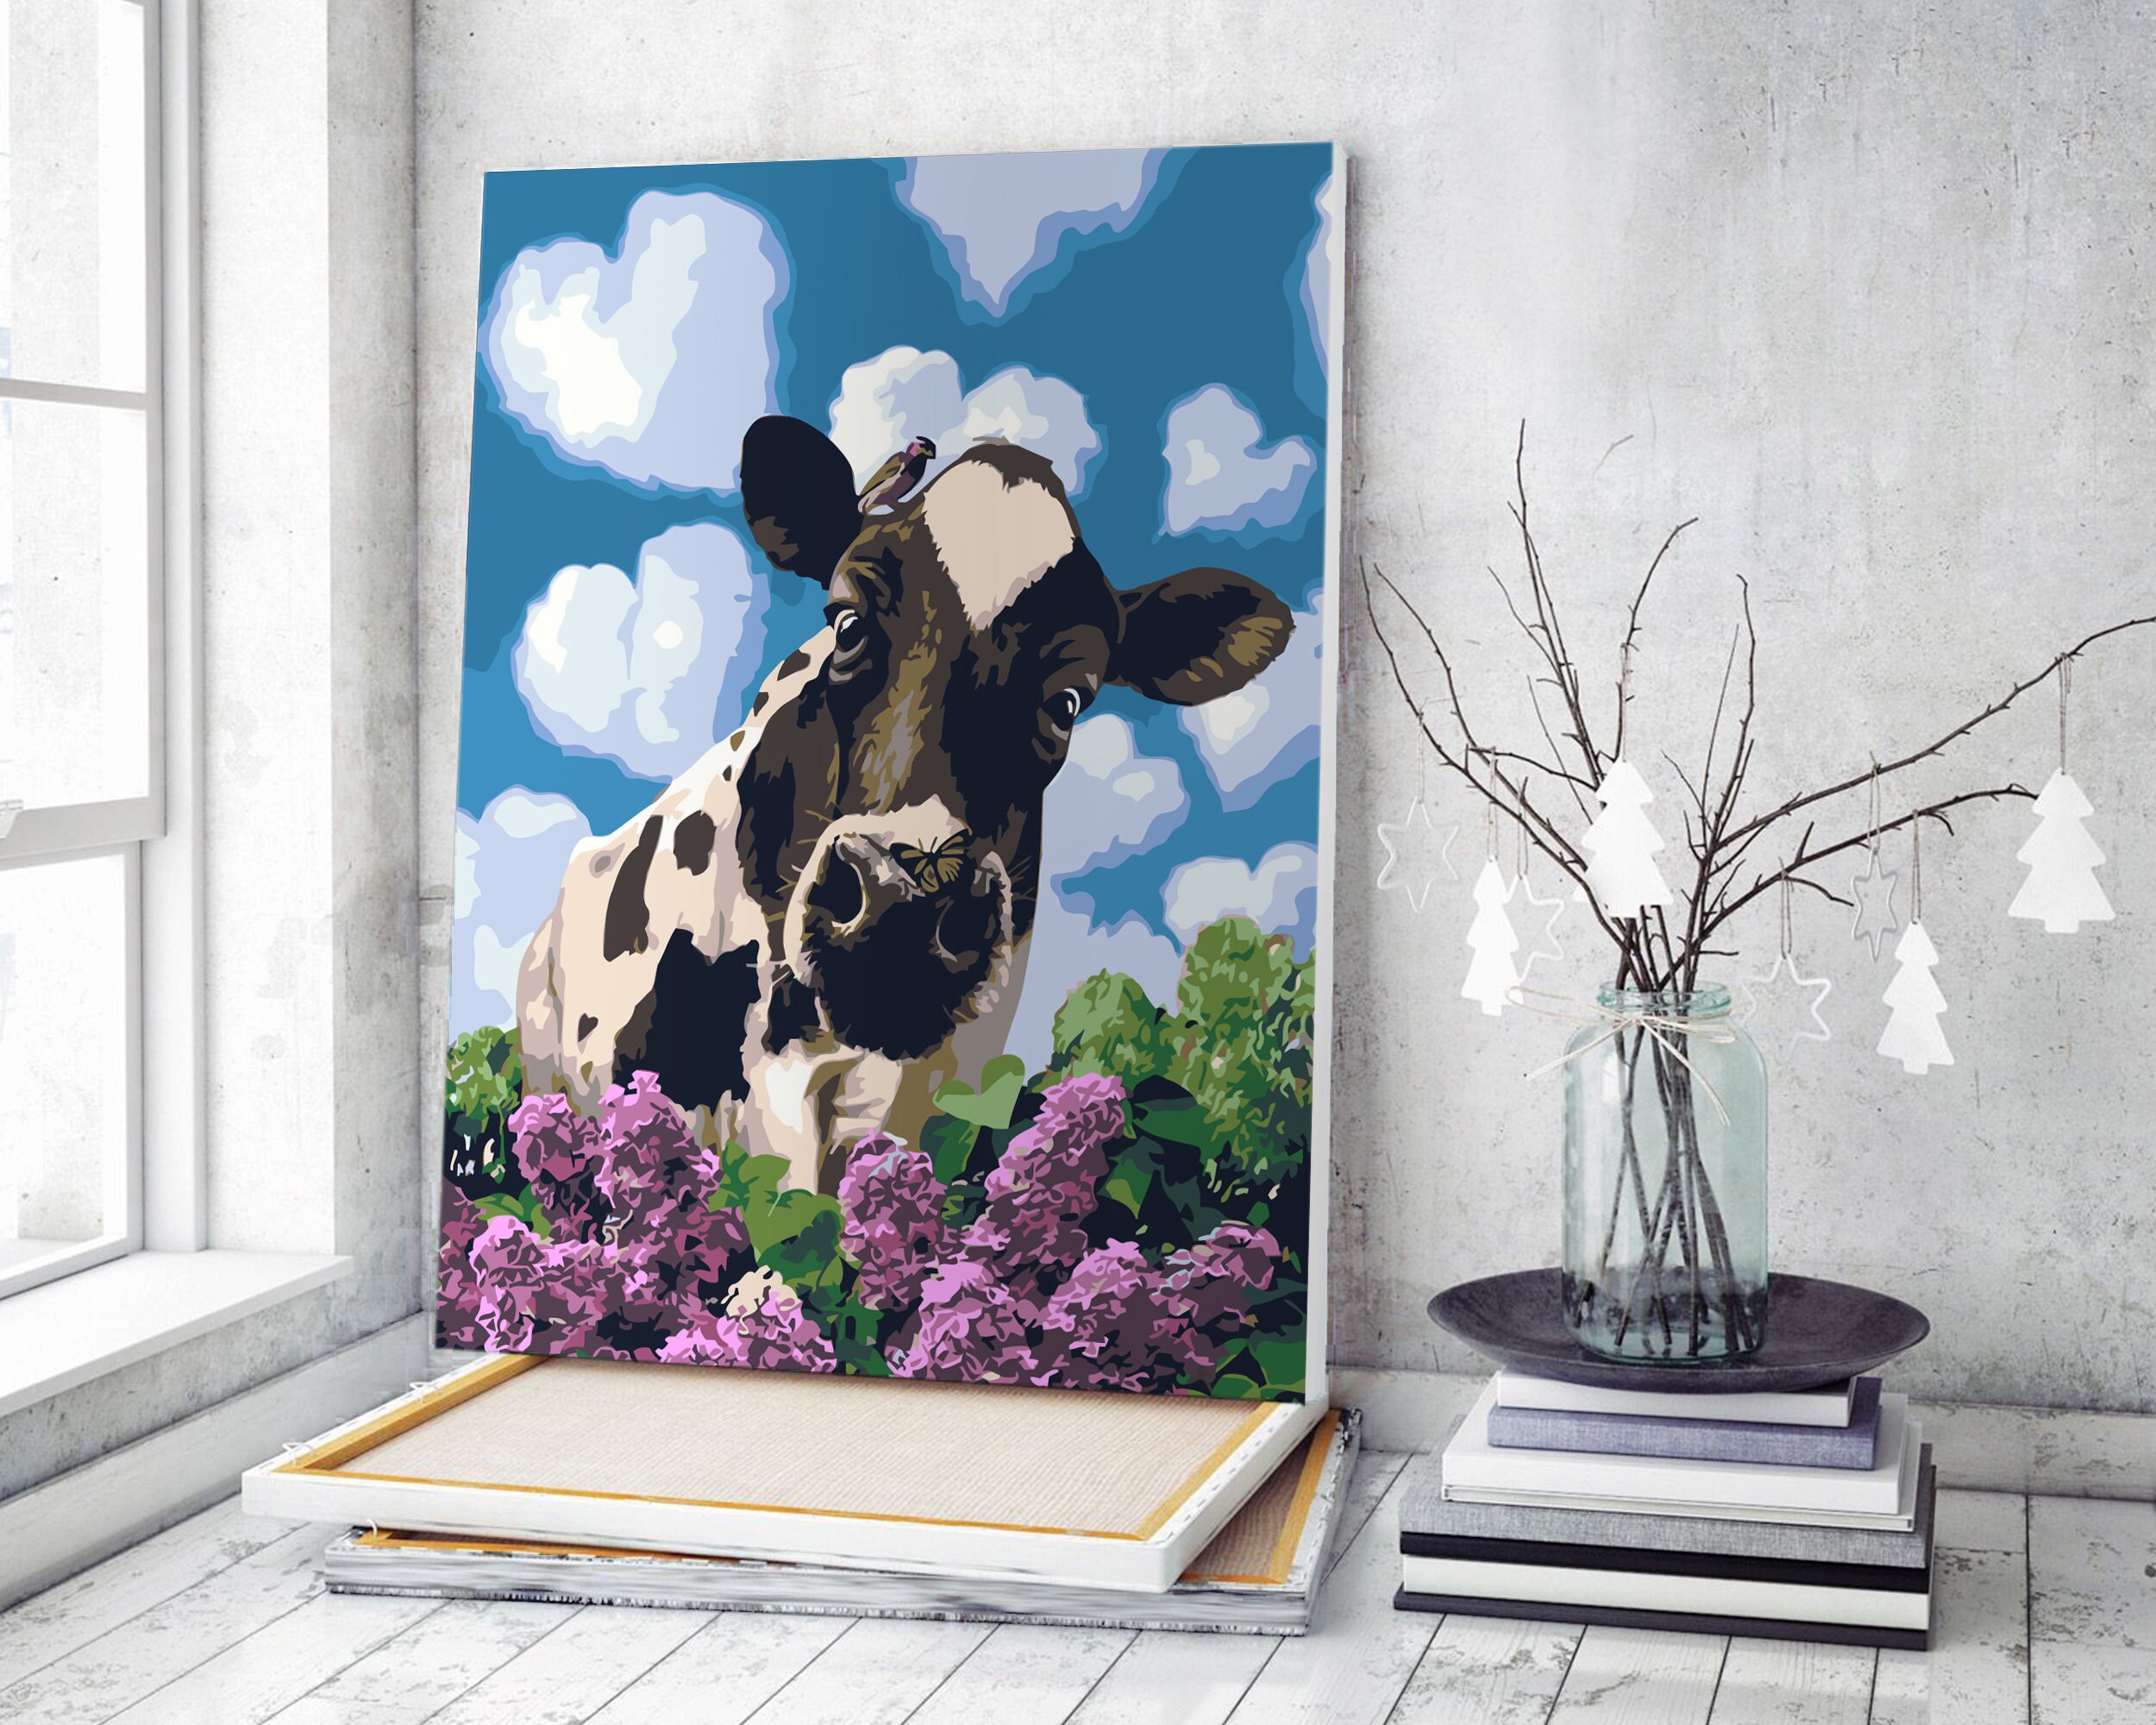  LVIITIS Cow Acrylic Paint by Number kit for Adults & Kids, Oil  Painting on Canvas,Drawing Paintwork with Paintbrushes,DIY Paint by Numbers  Set Painting for Beginners16x20 inch(No Frame)